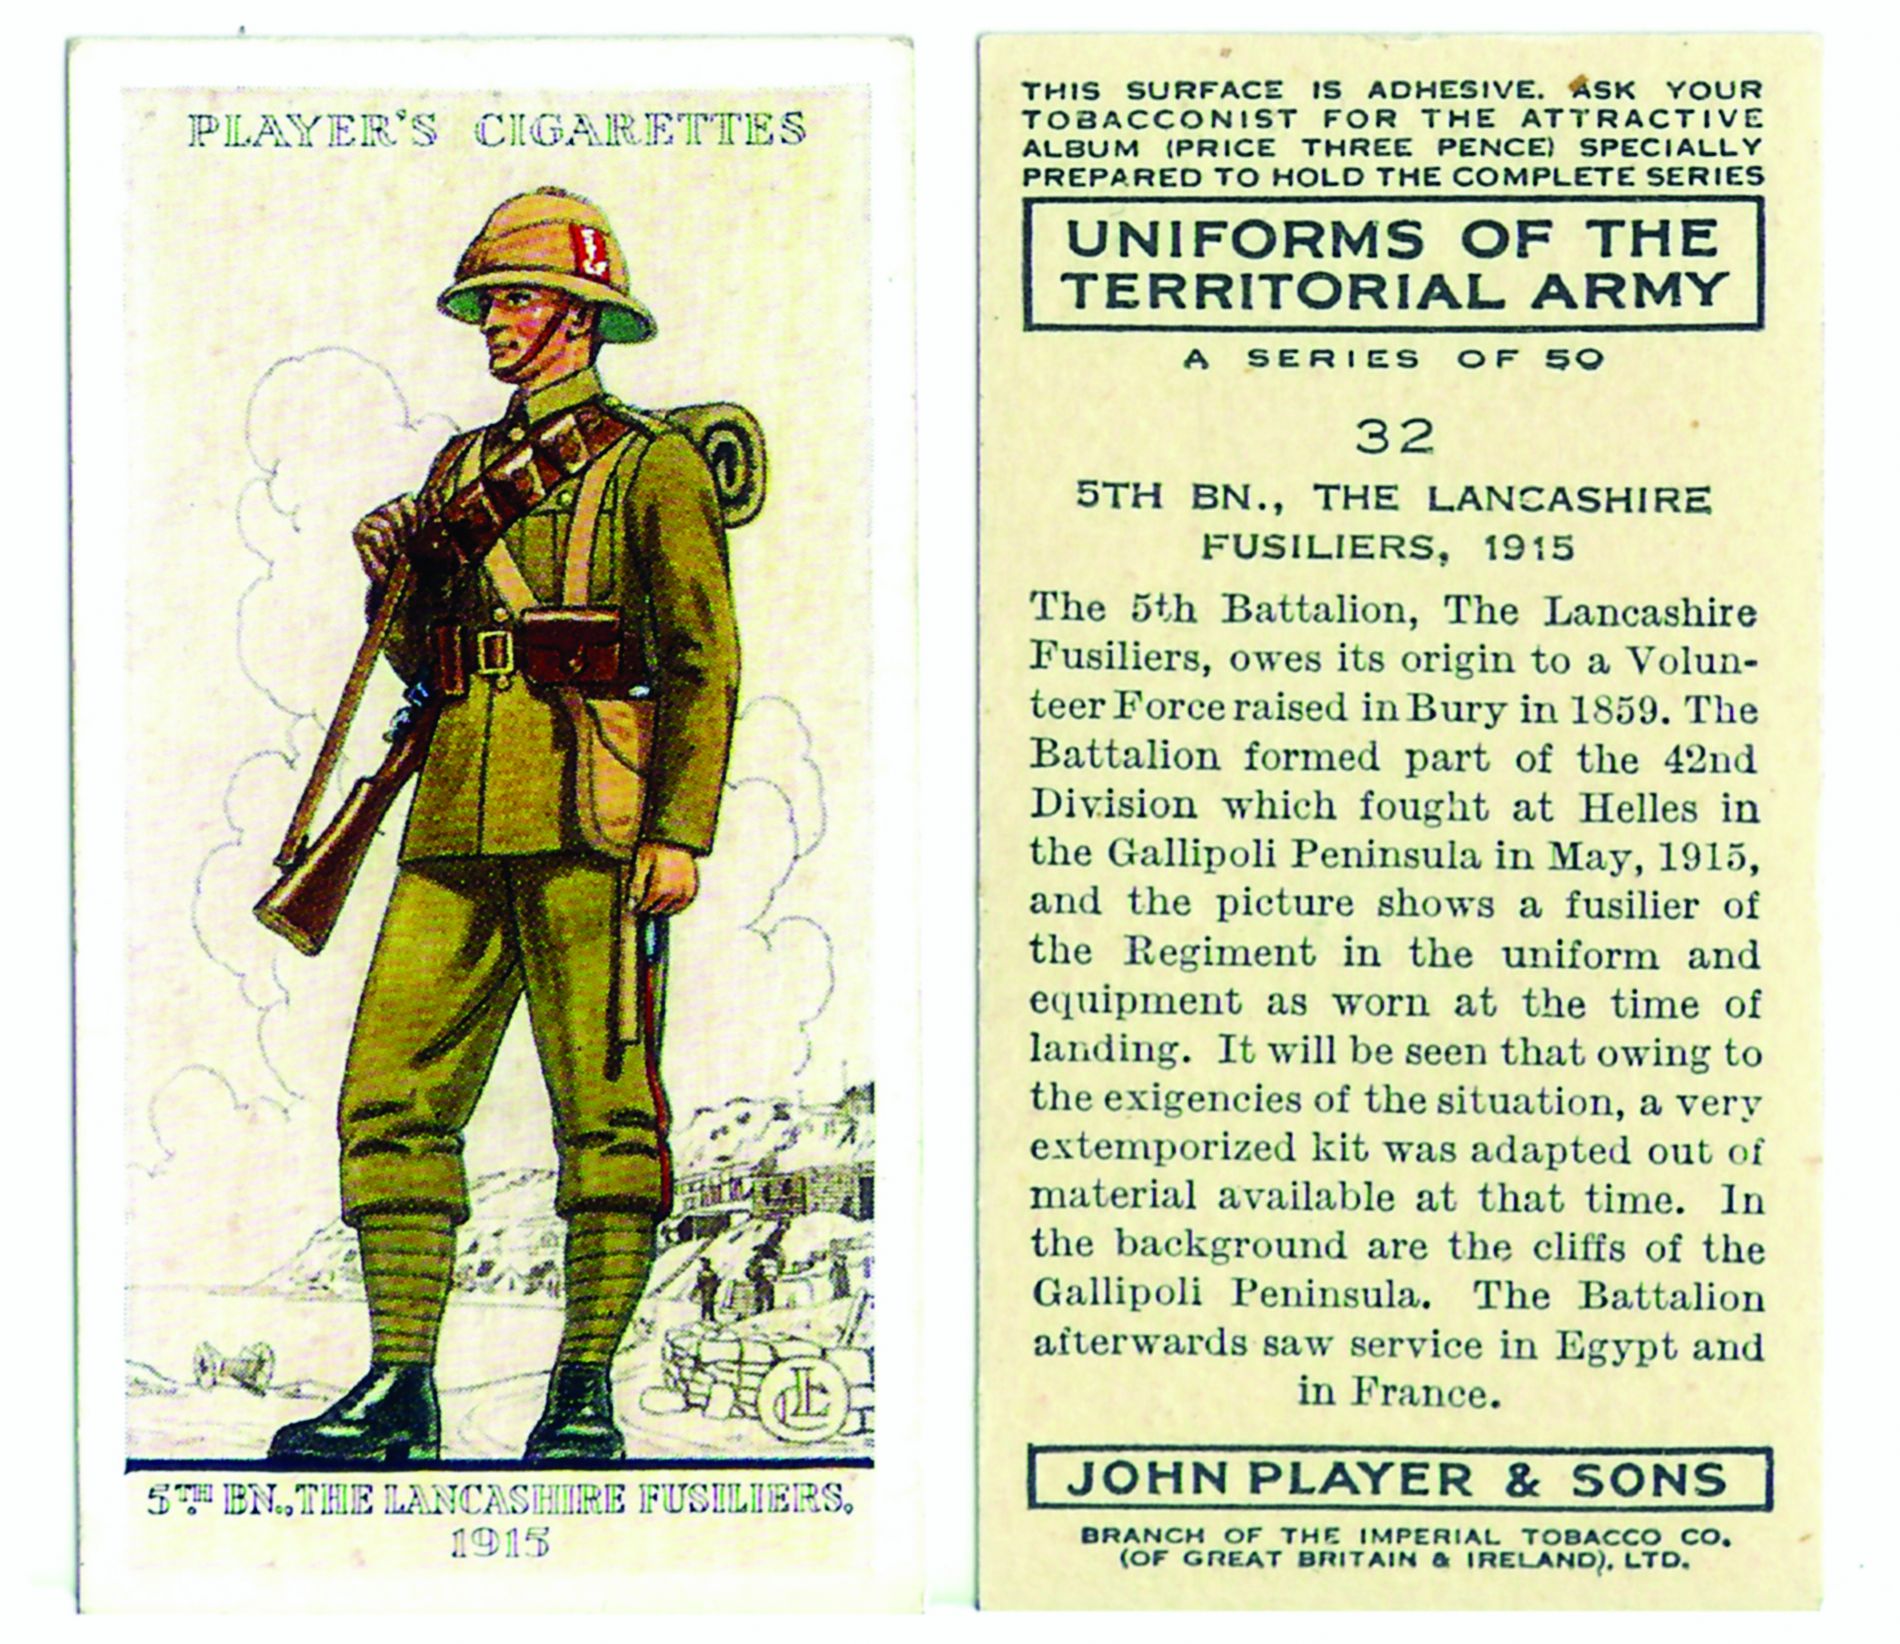 Issued in 1939 in packages of Player’s cigarettes, this card is from a set of Uniforms of the Territorial Army and was one of the final sets issued before rationing led to the banning of tobacco cards.